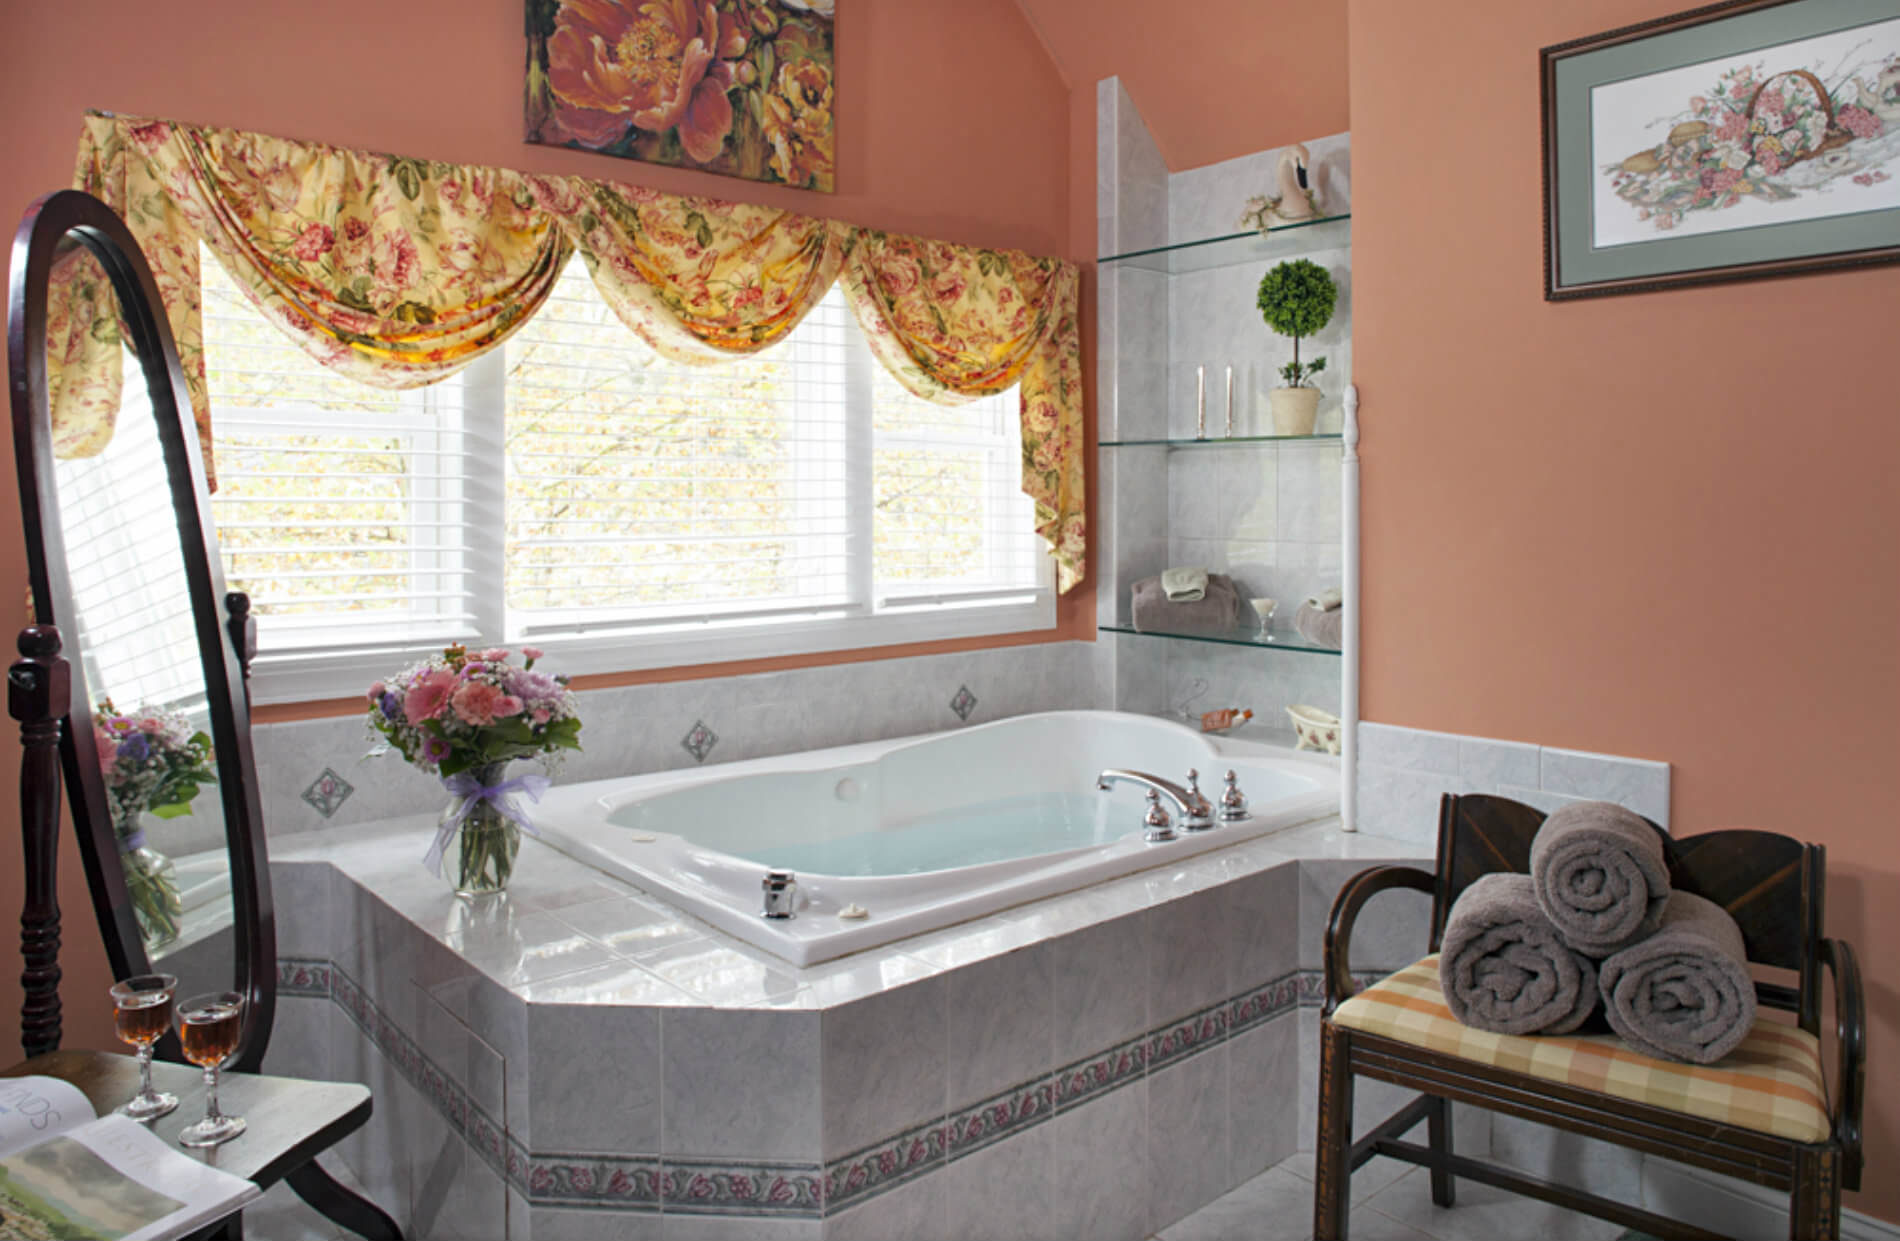 Deep step-in tub in room with peach walls with large window over it